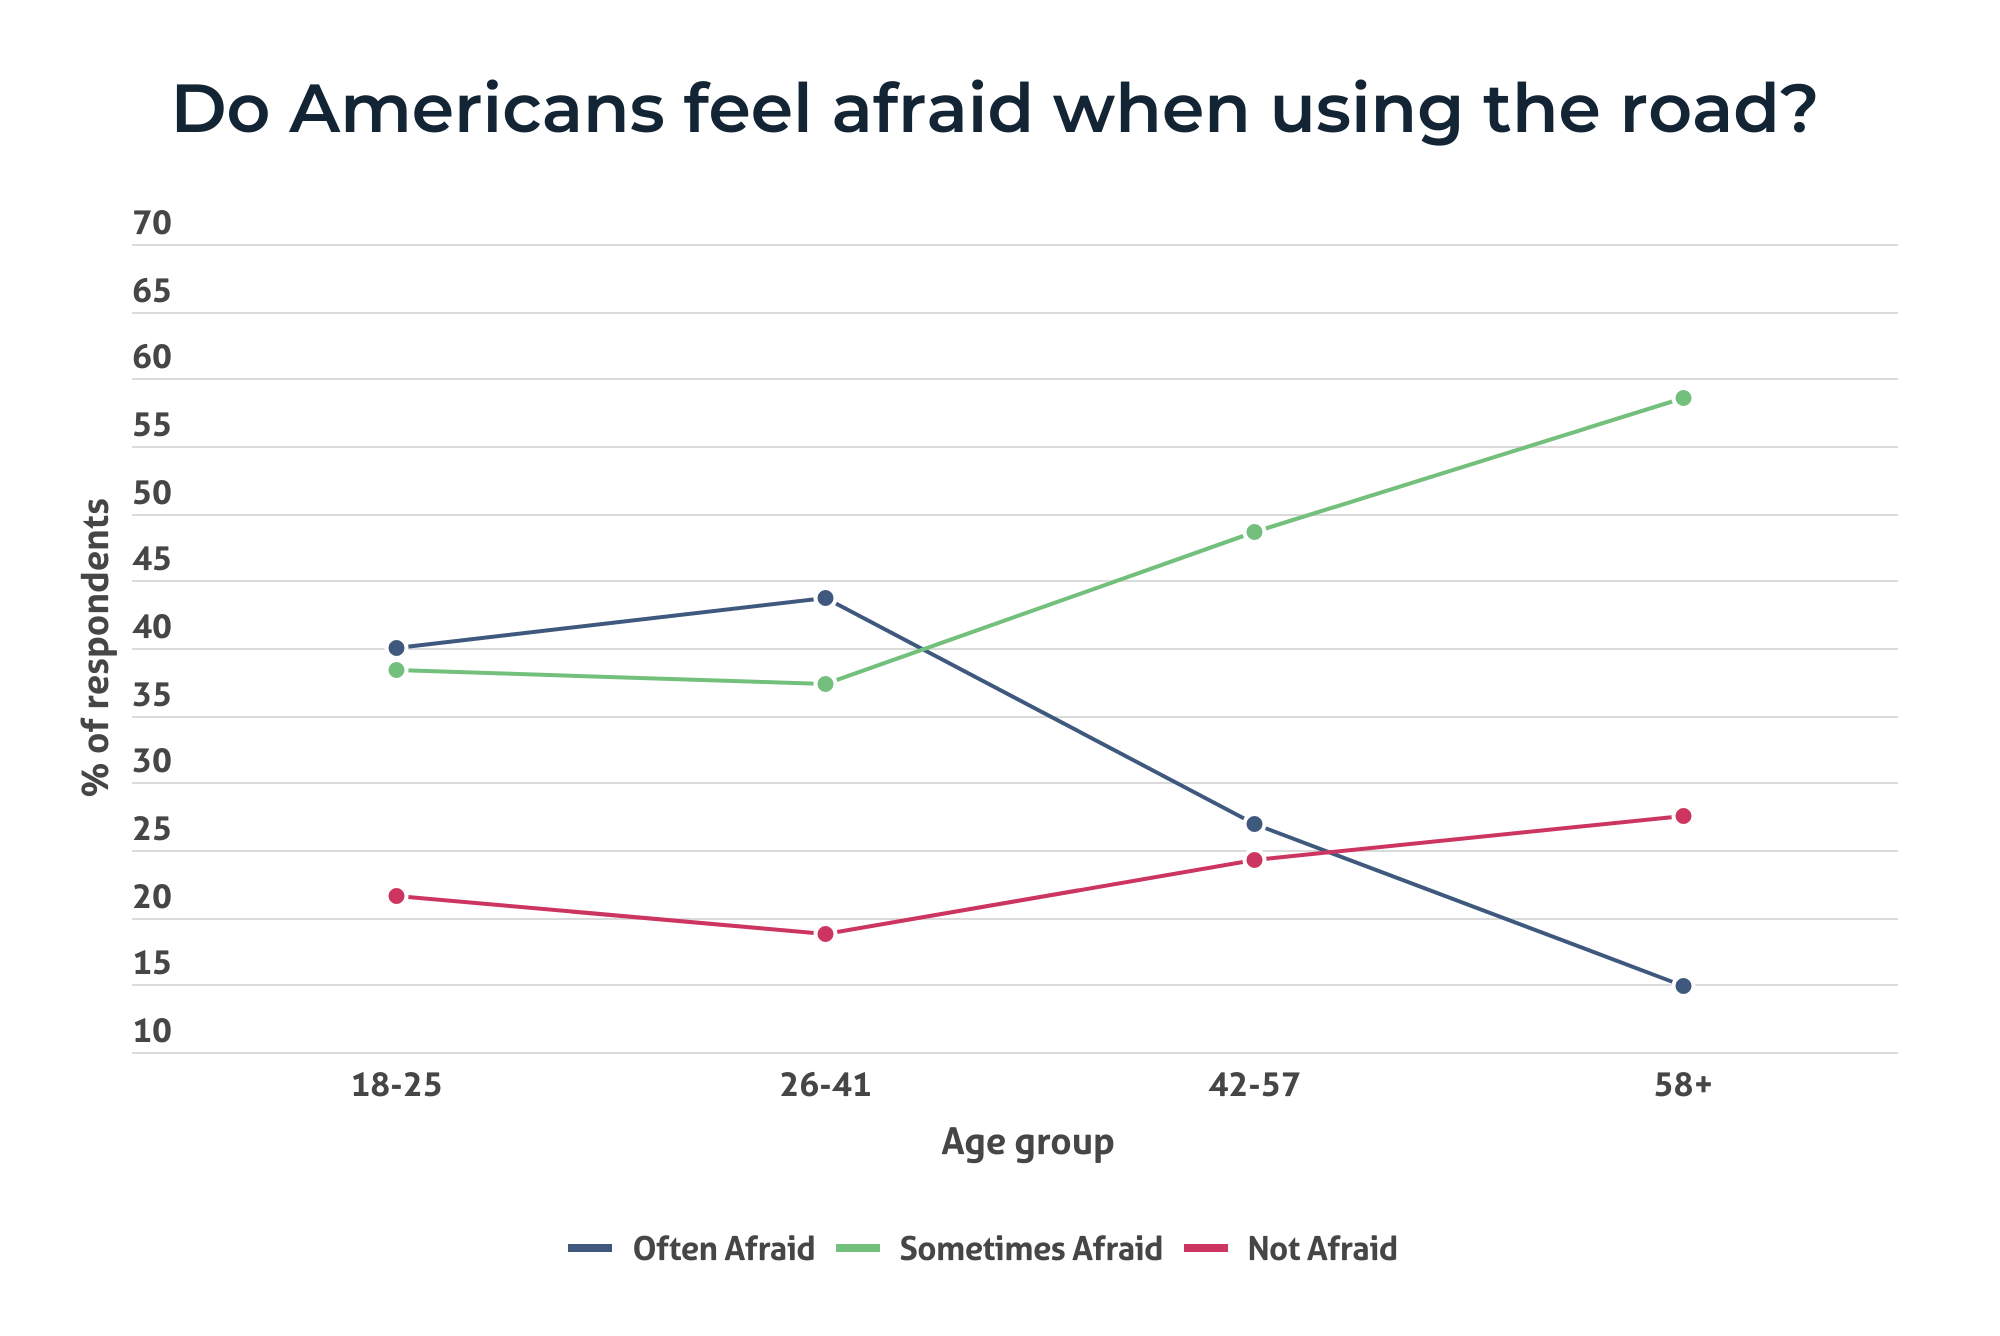 Line chart showing how often American road users feel afraid when using the road, by age group